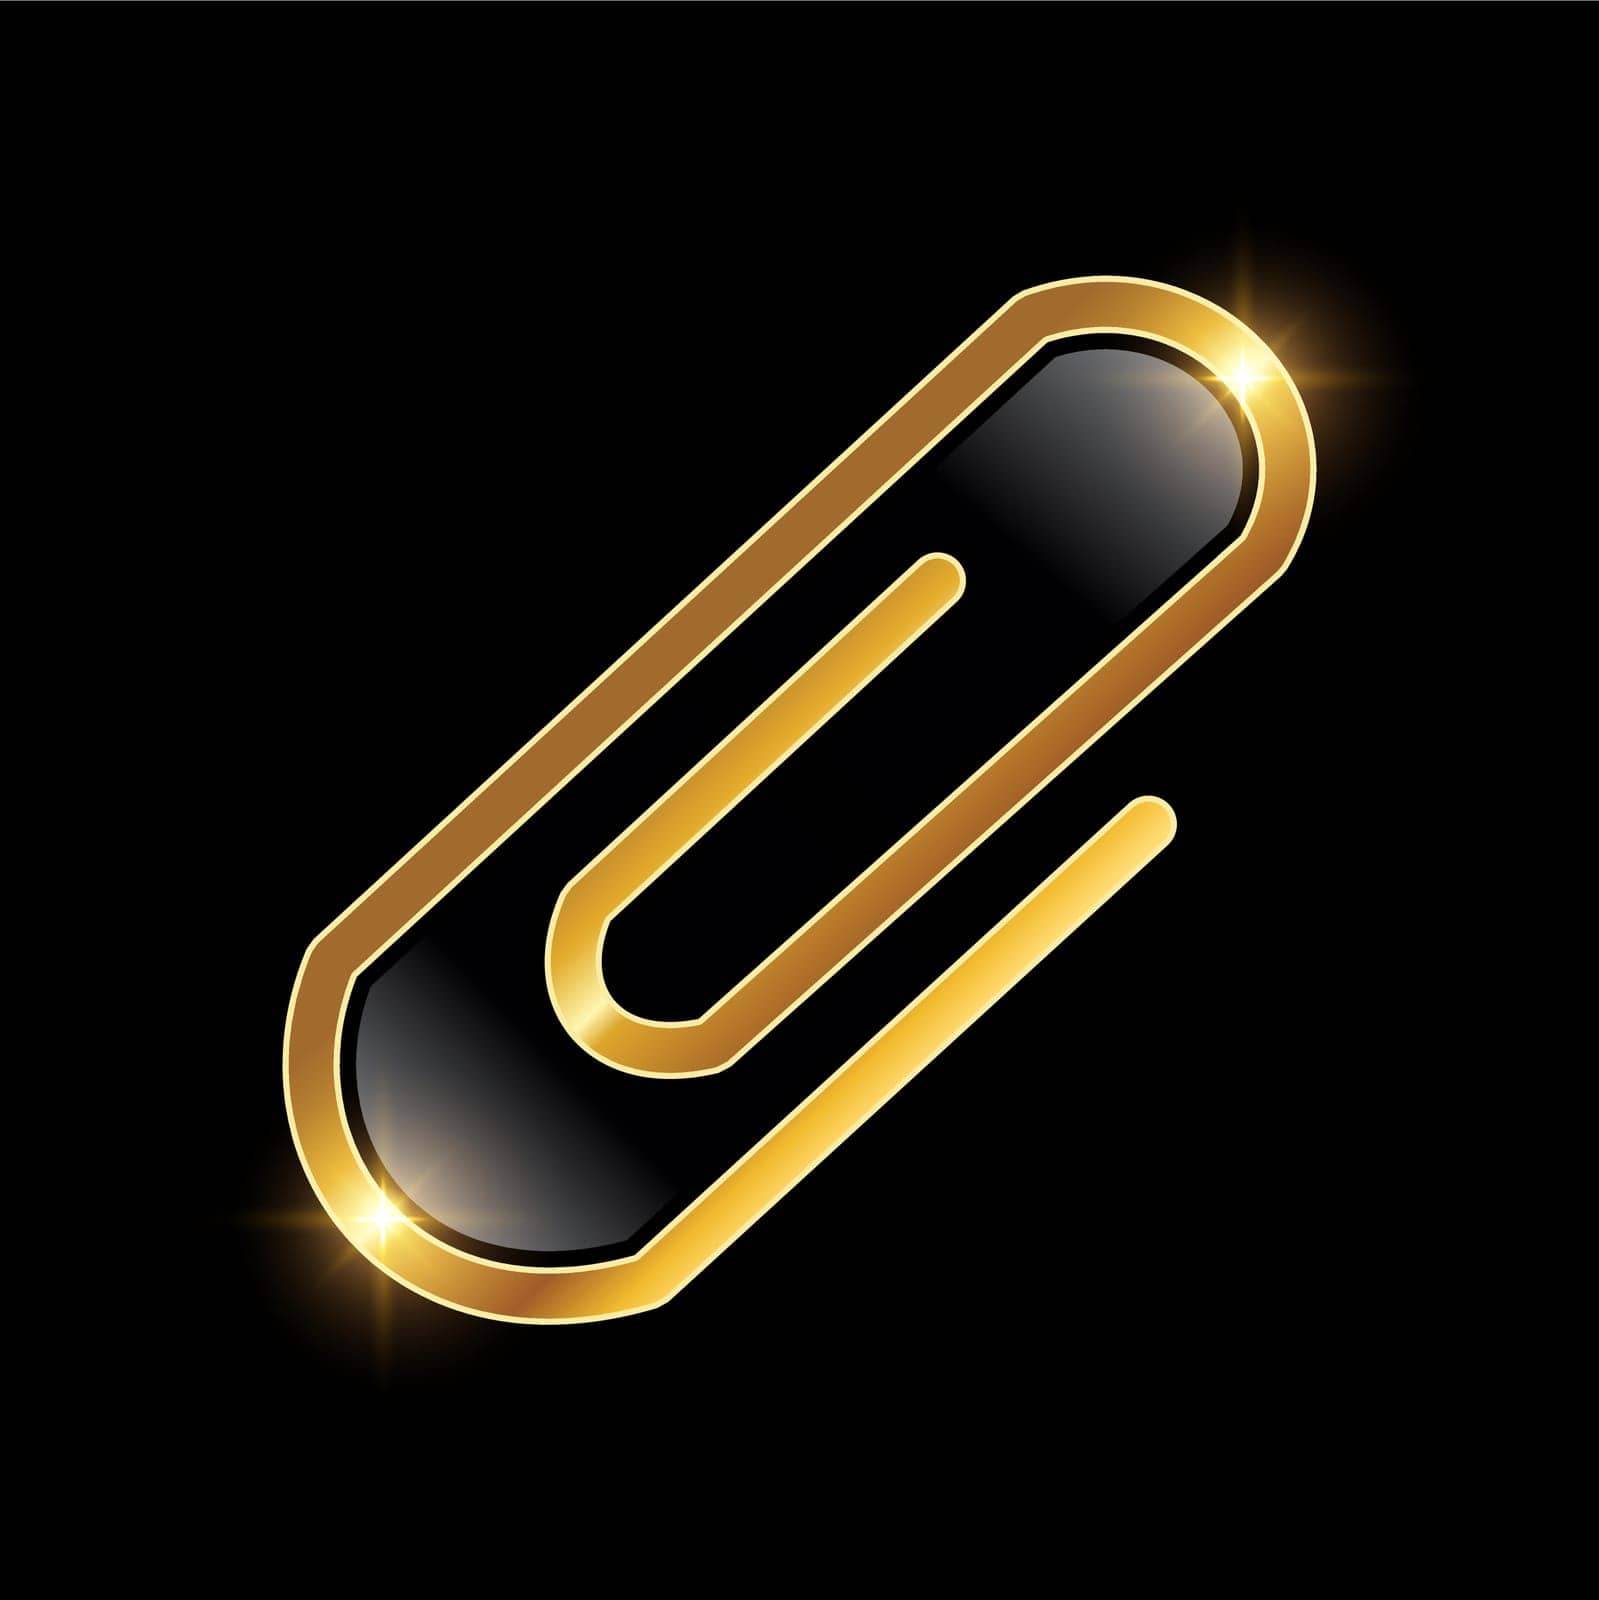 Golden Paper Clip Vector Icon by Up2date